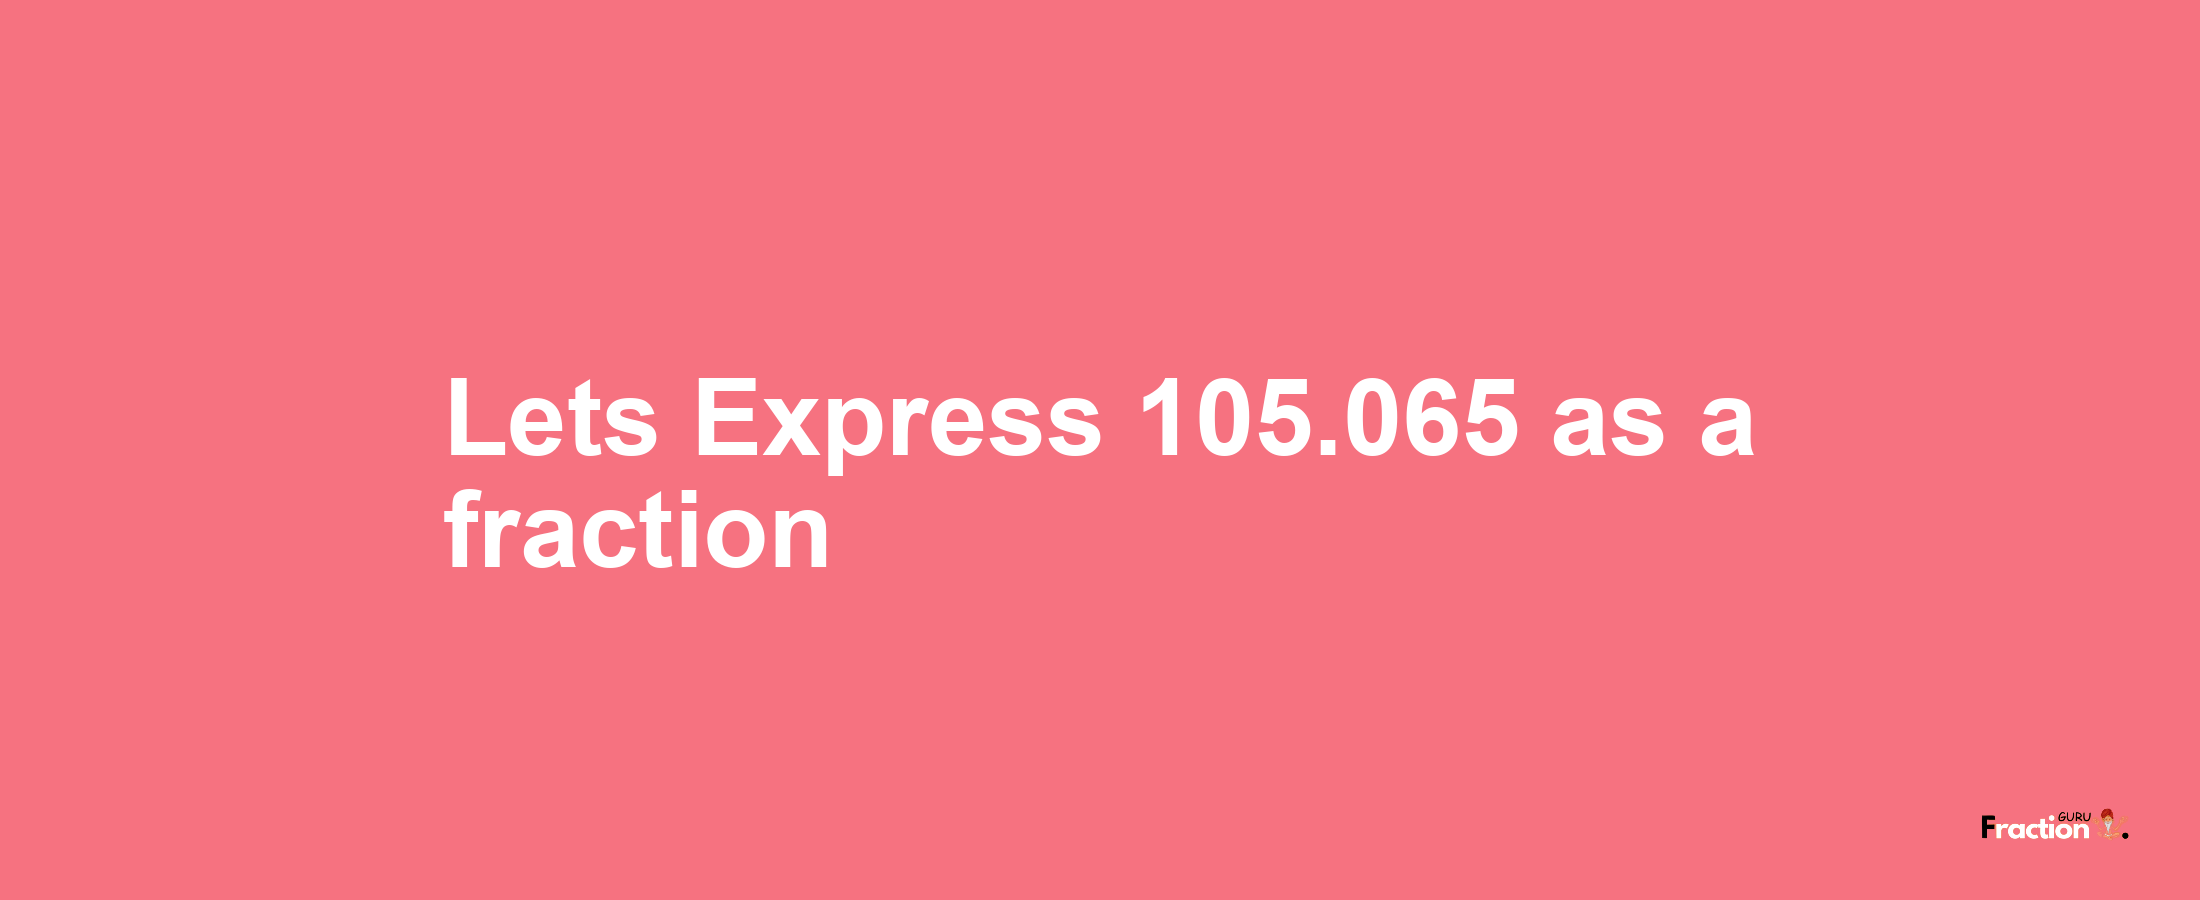 Lets Express 105.065 as afraction